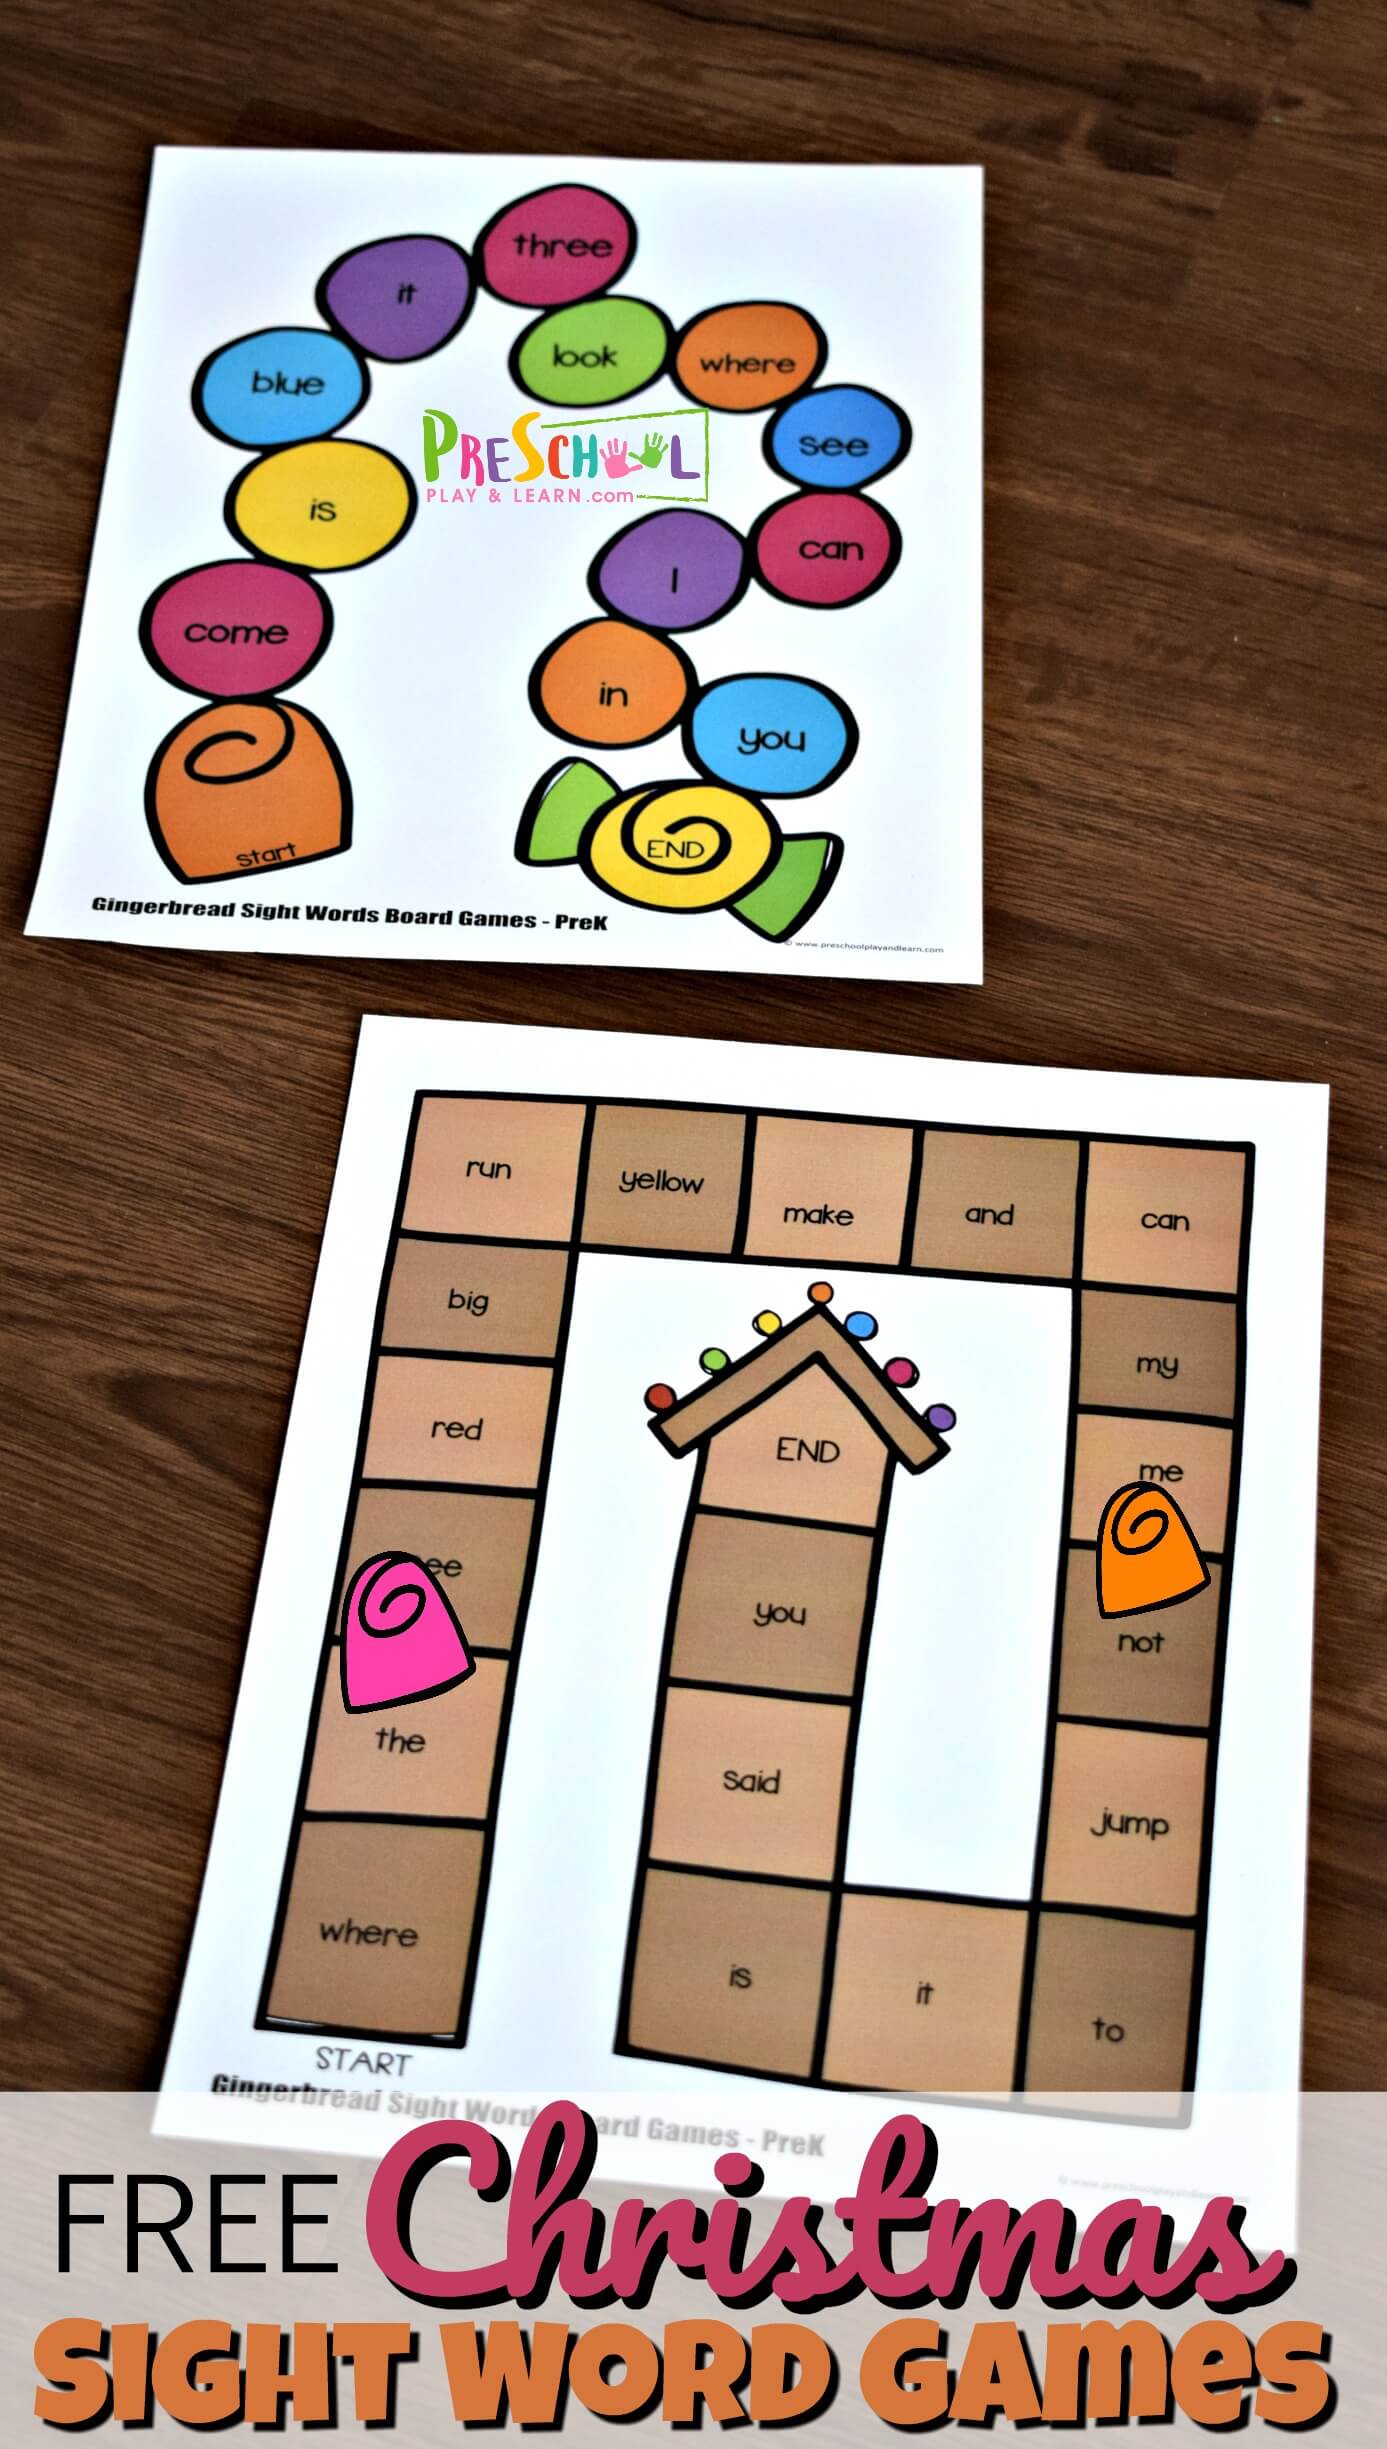 free-printable-christmas-sight-word-games-for-preschoolers